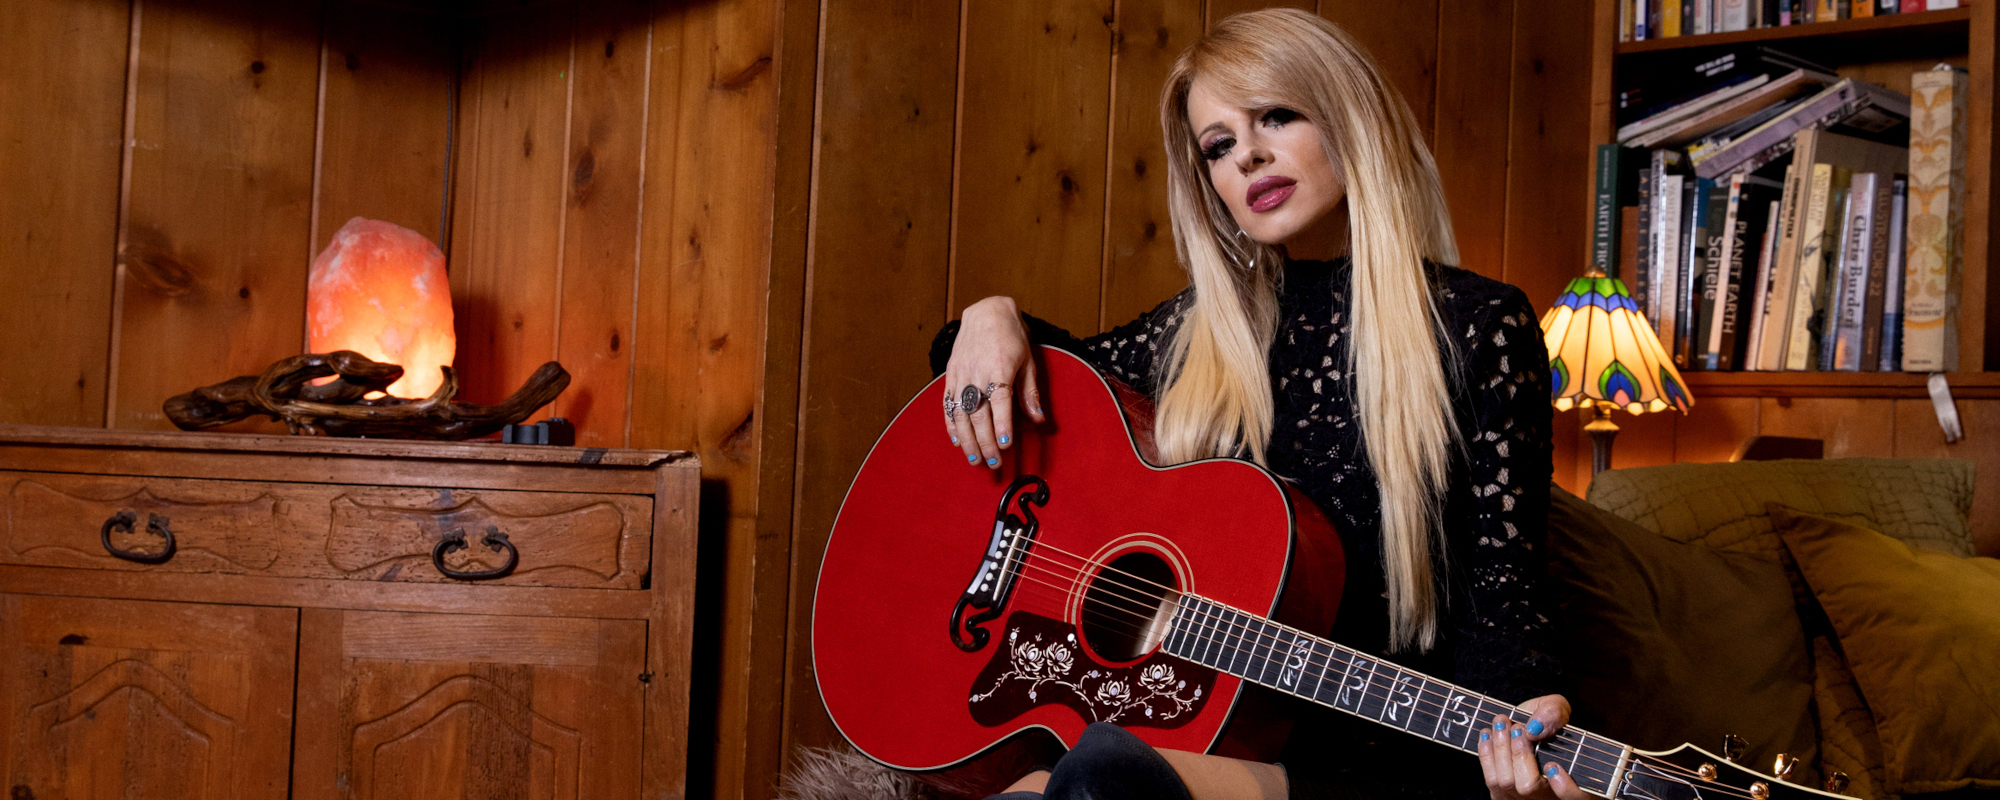 Orianthi Teams Up with Gibson Luthiers to Craft Signature SJ-200 Acoustic Guitar